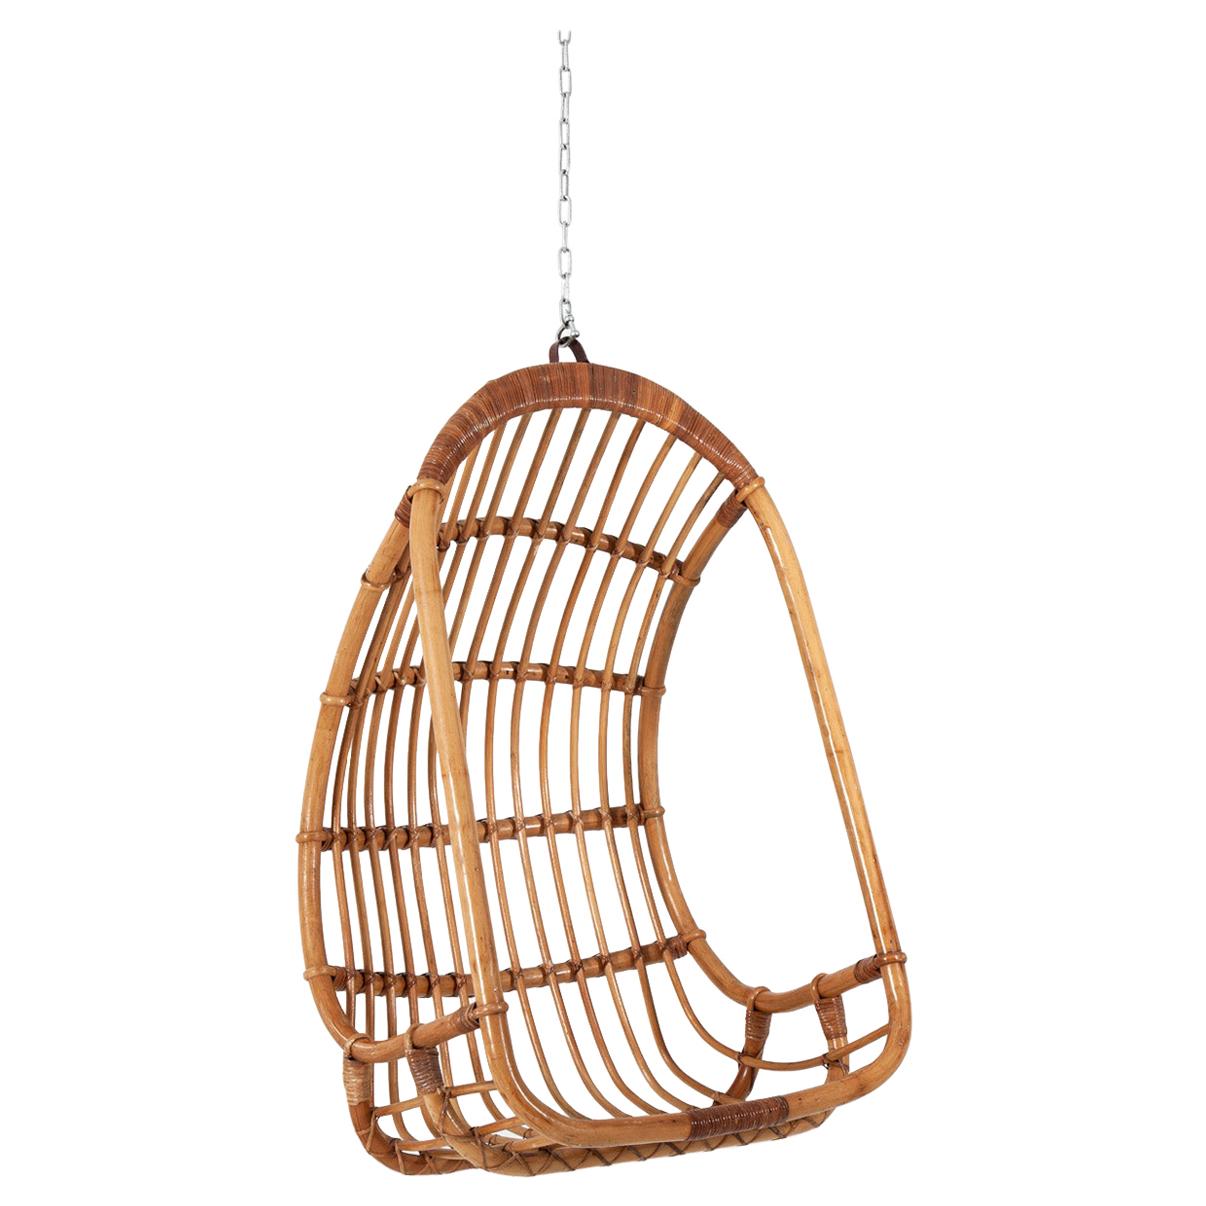 Mid-20th Century Cane Hanging Chair For Sale